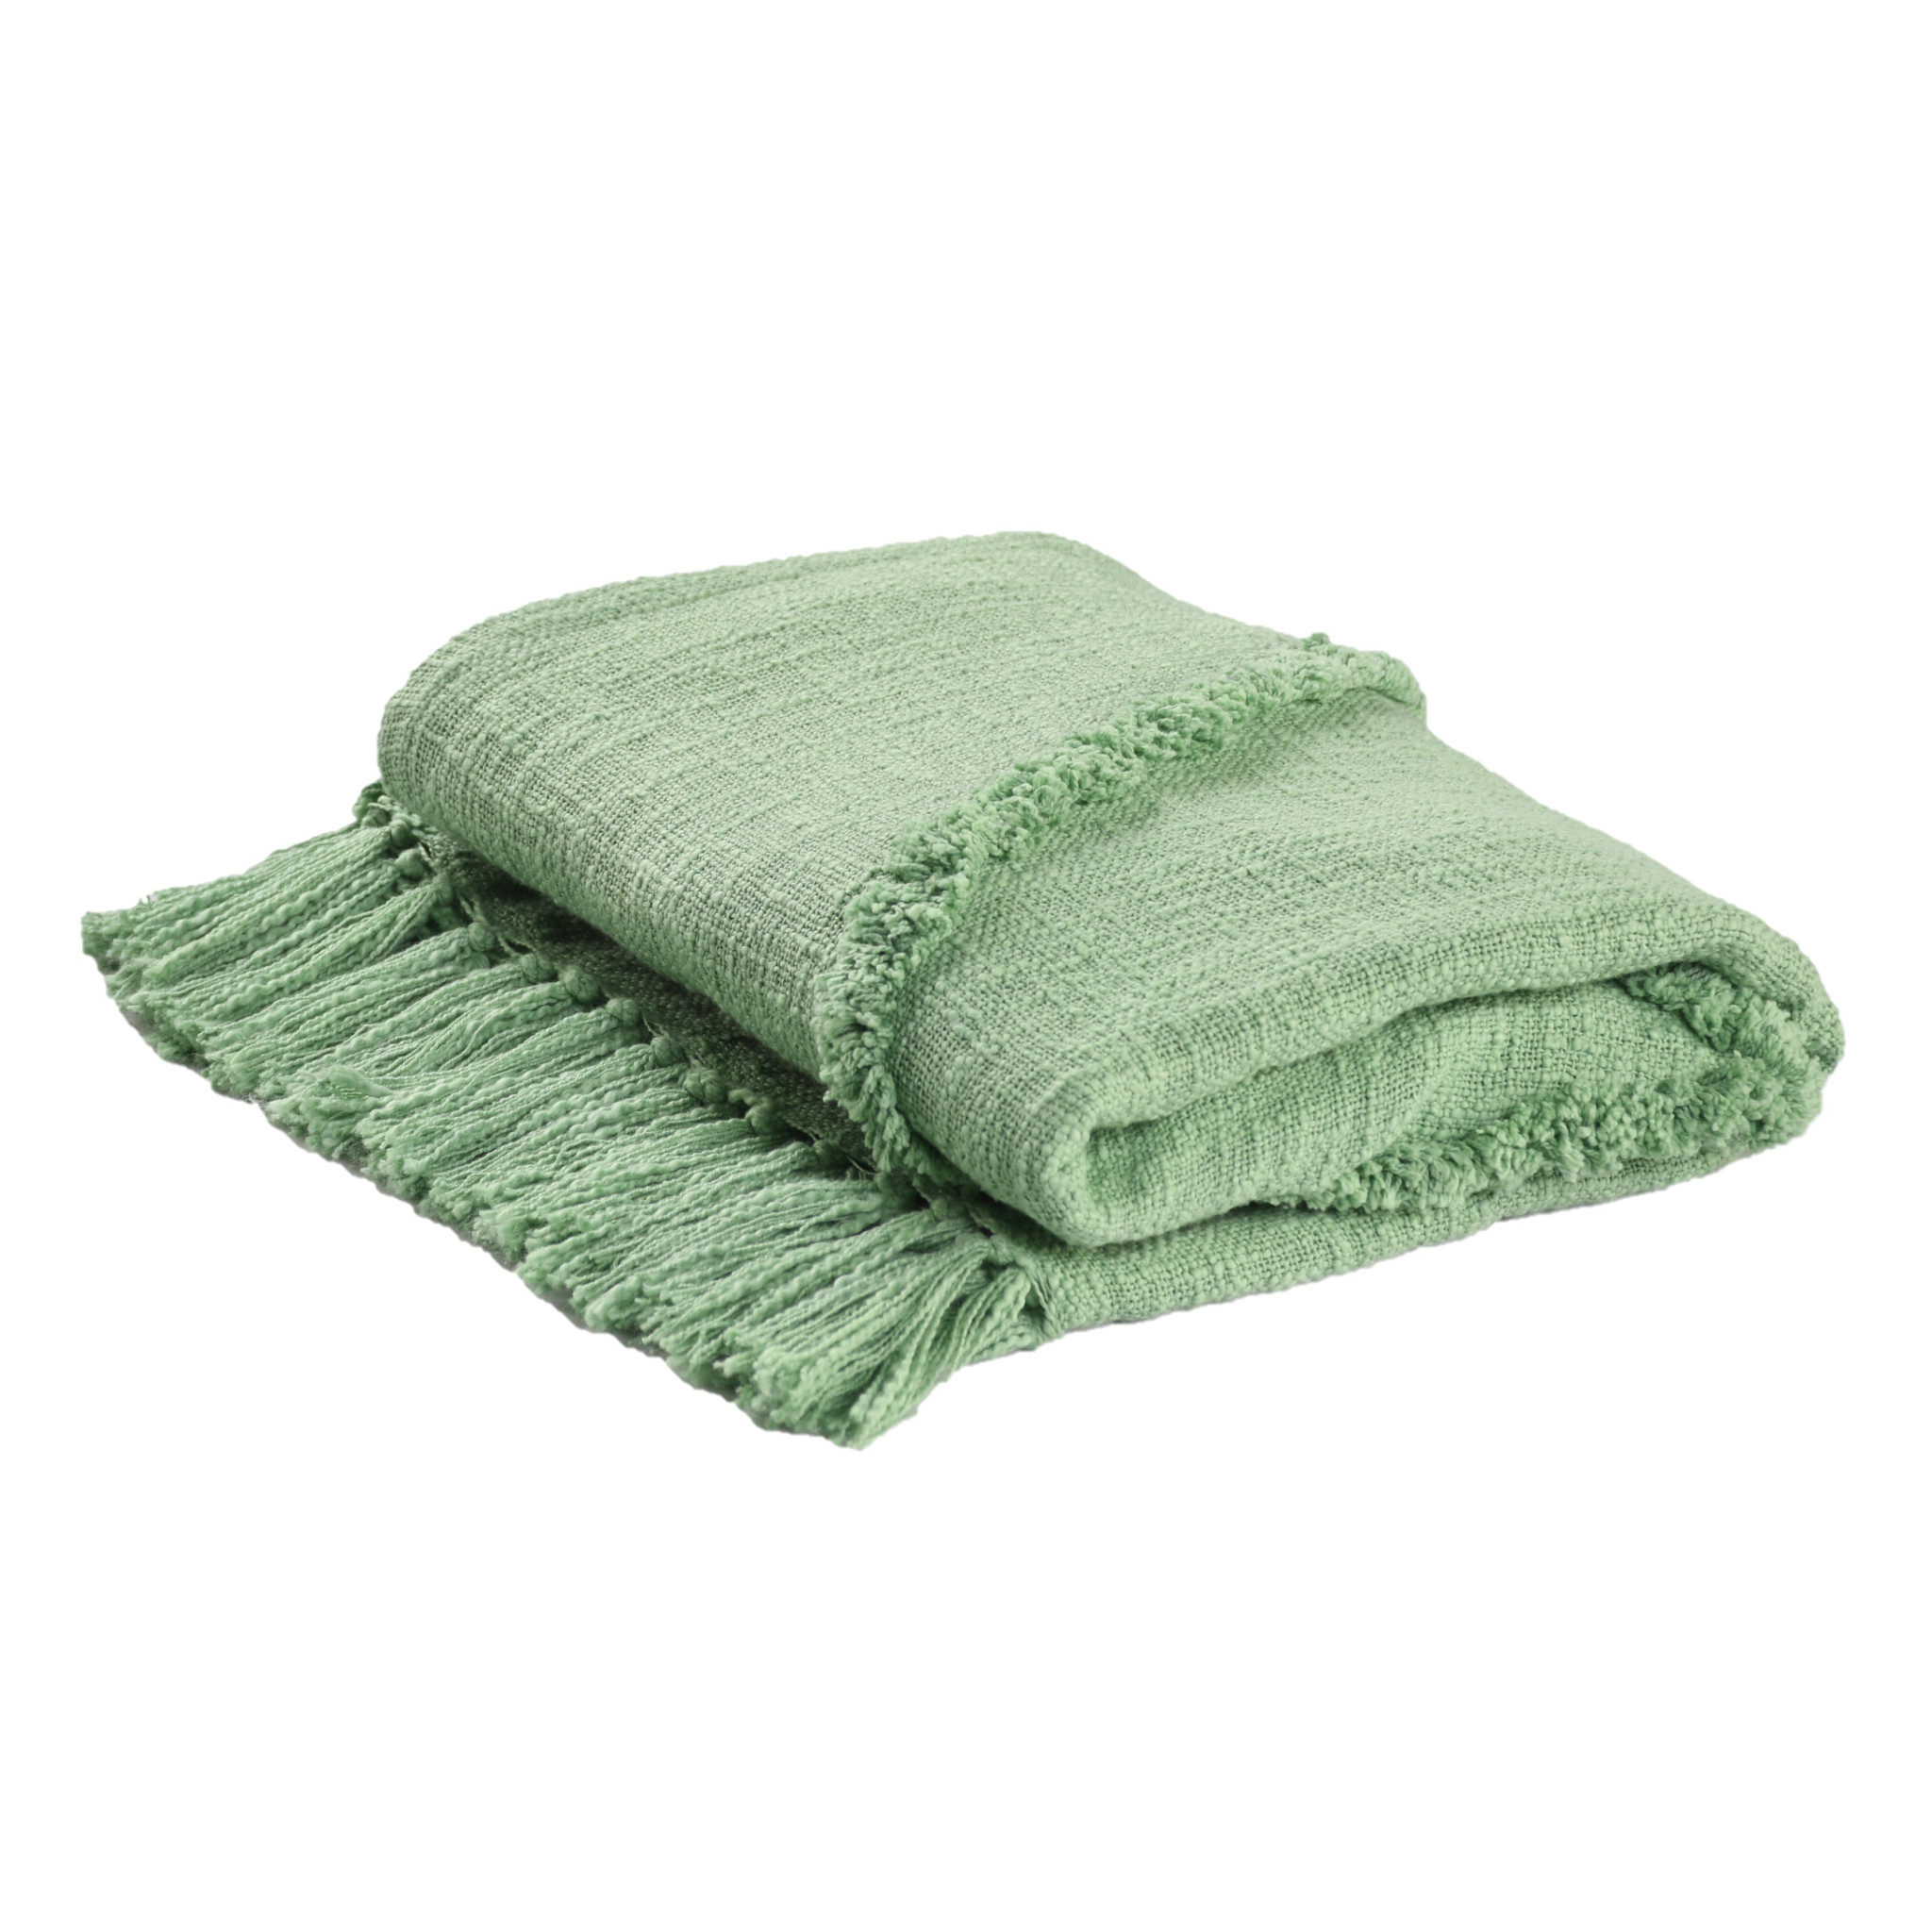 Green Woven Cotton Solid Color Throw Blanket-516547-1